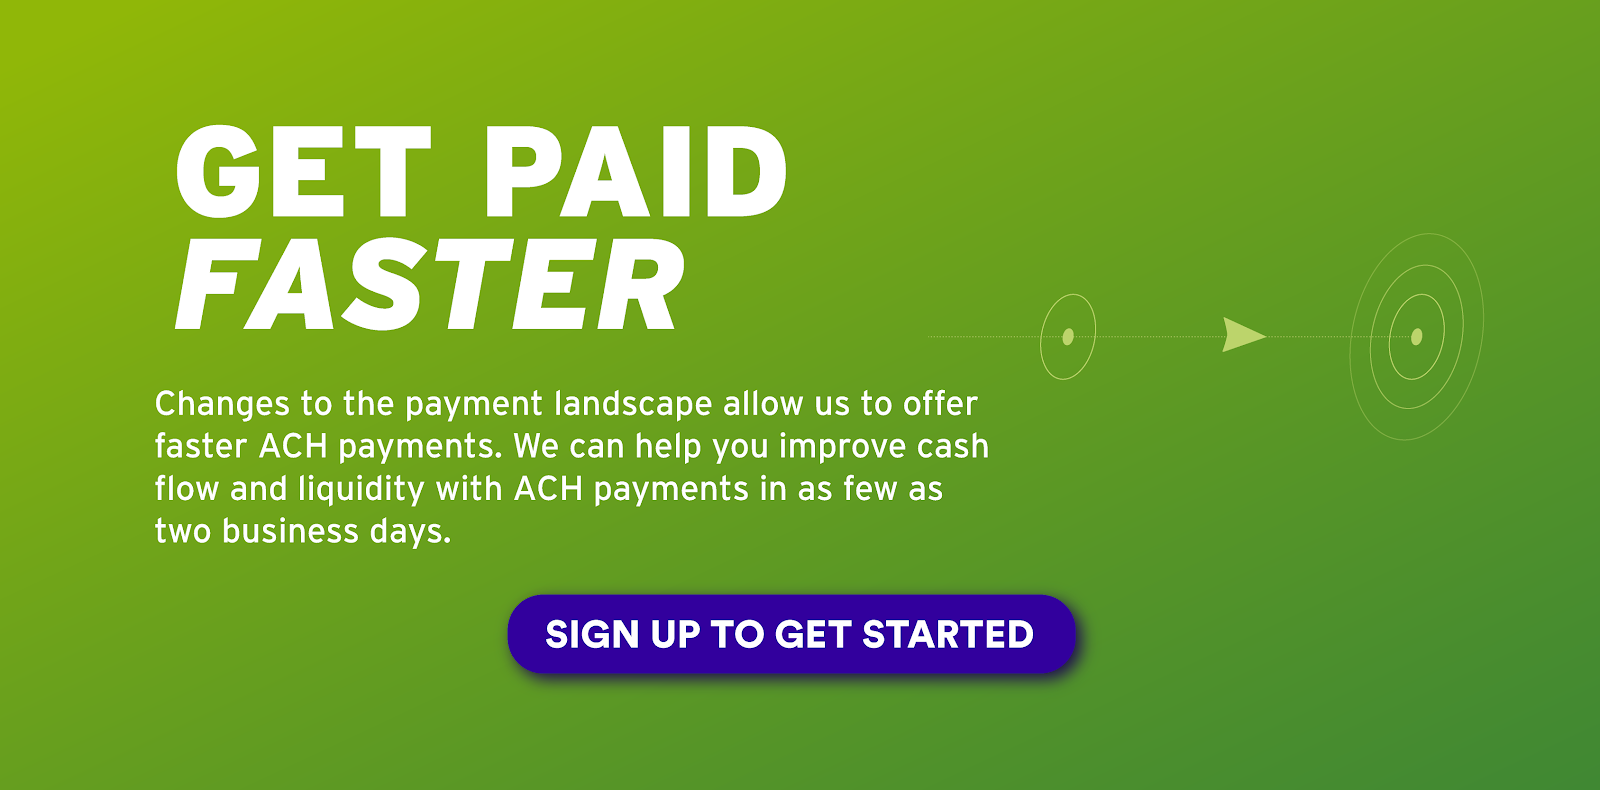 Get paid faster image